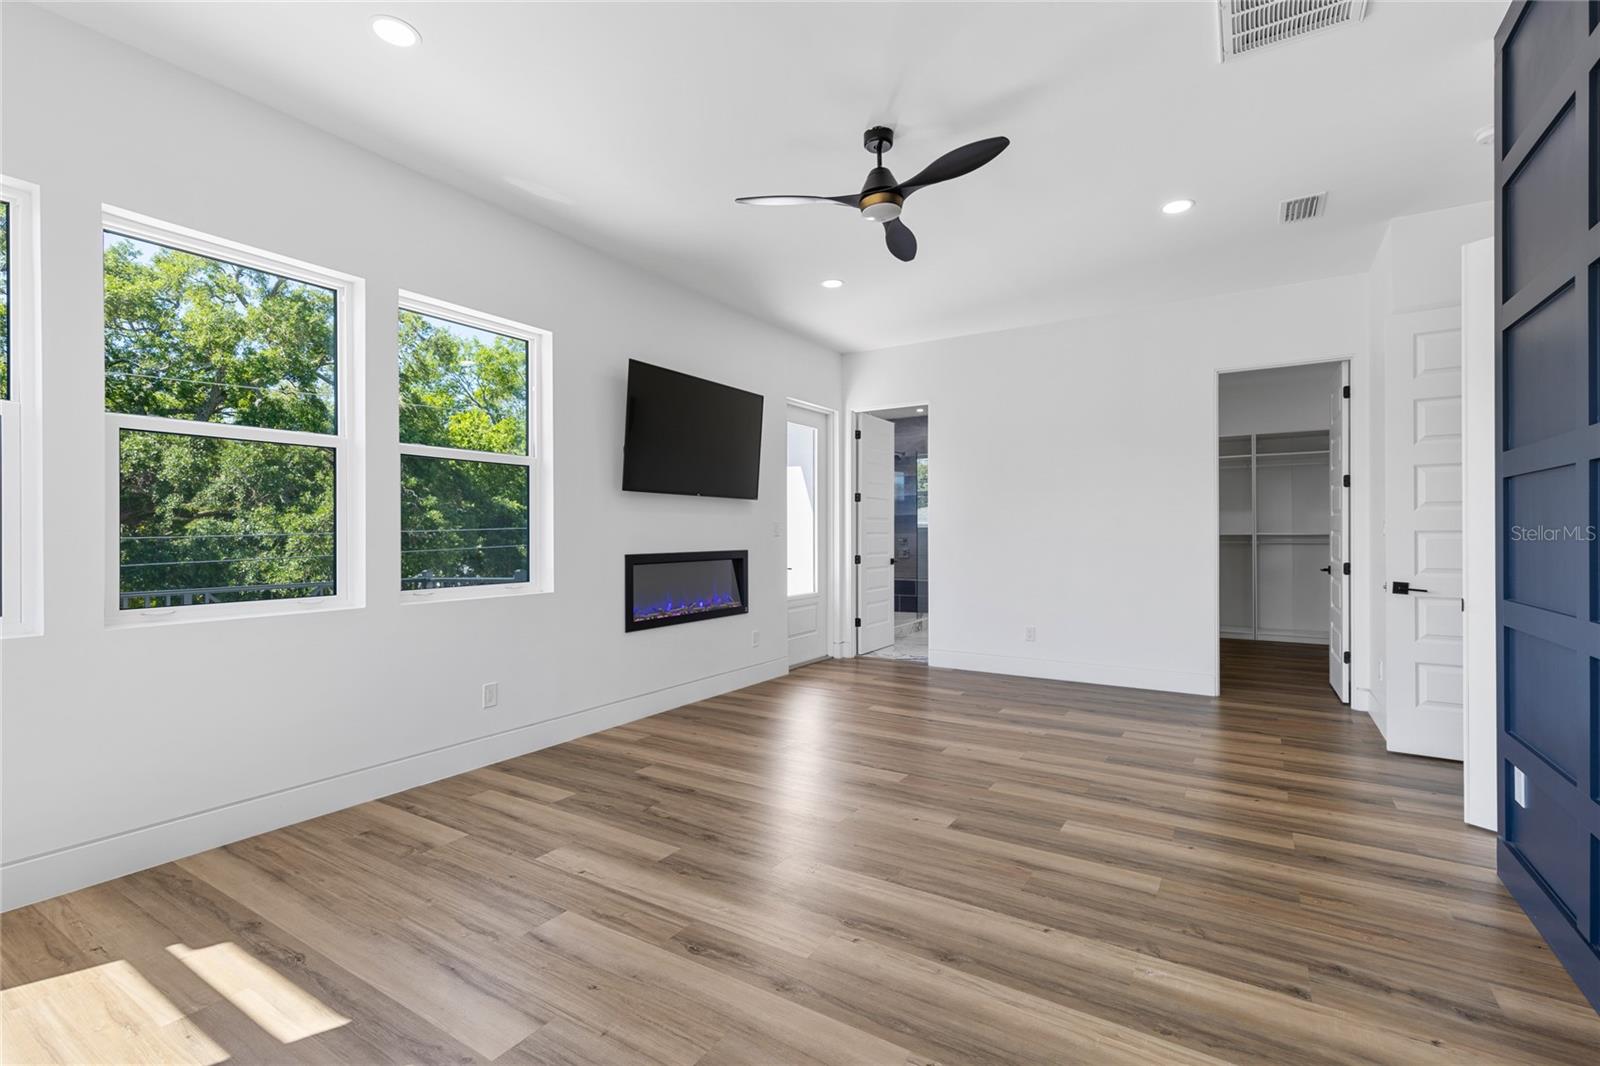 Primary Ensuite with Fireplace, TV and views of downtown Tampa